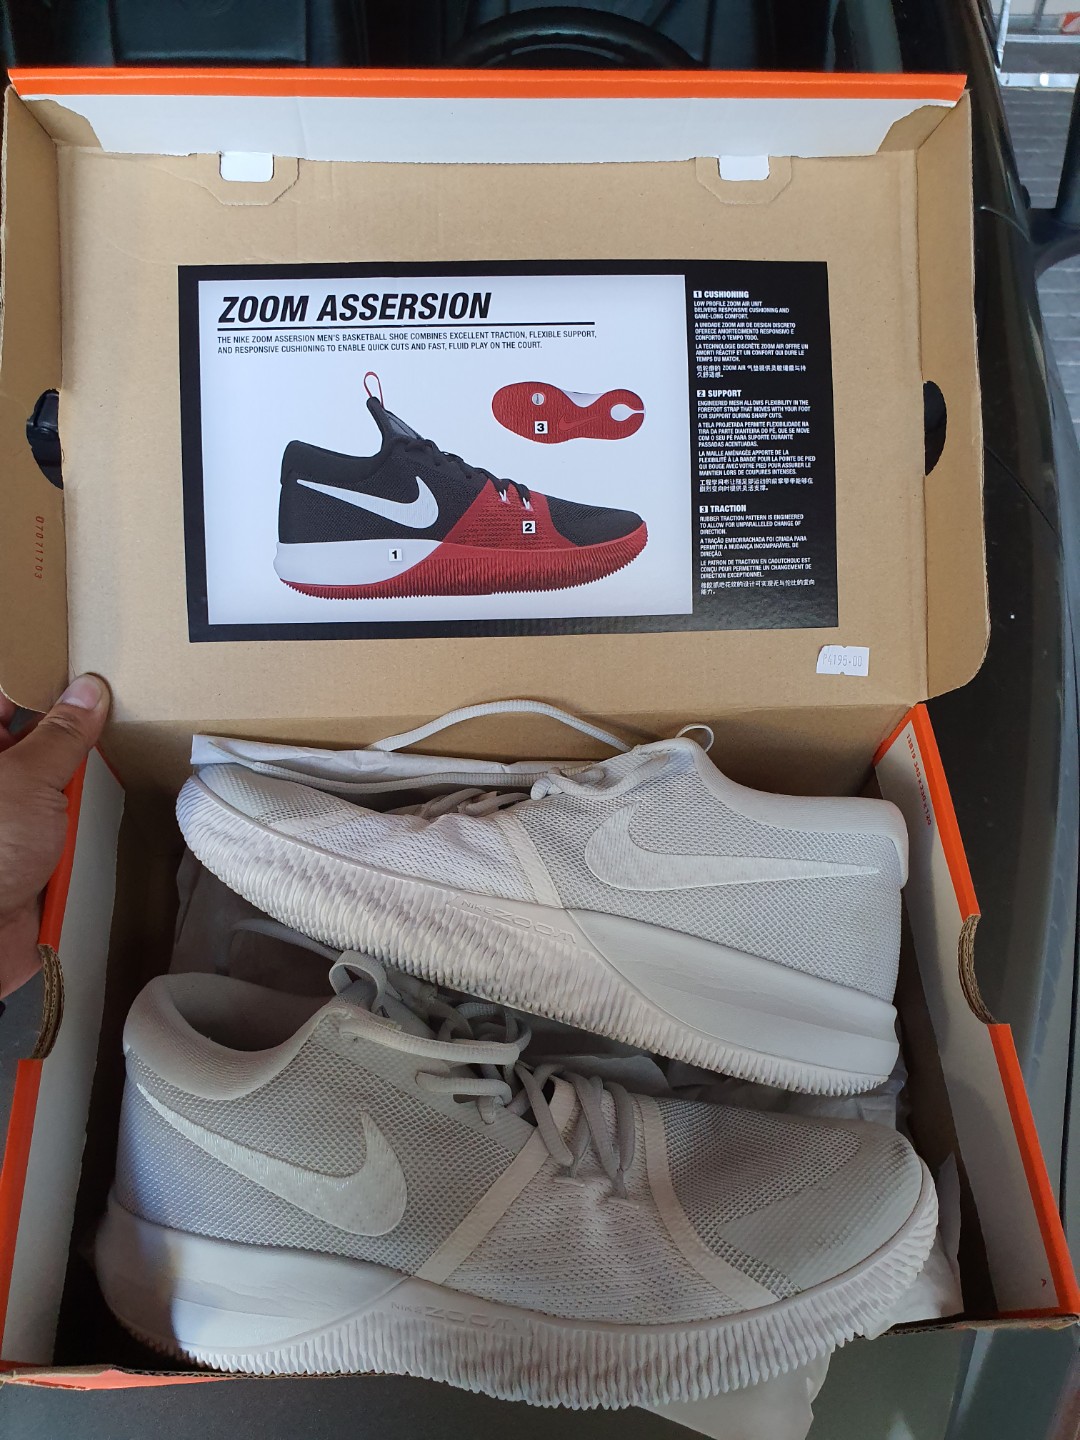 nike zoom assersion basketball shoes